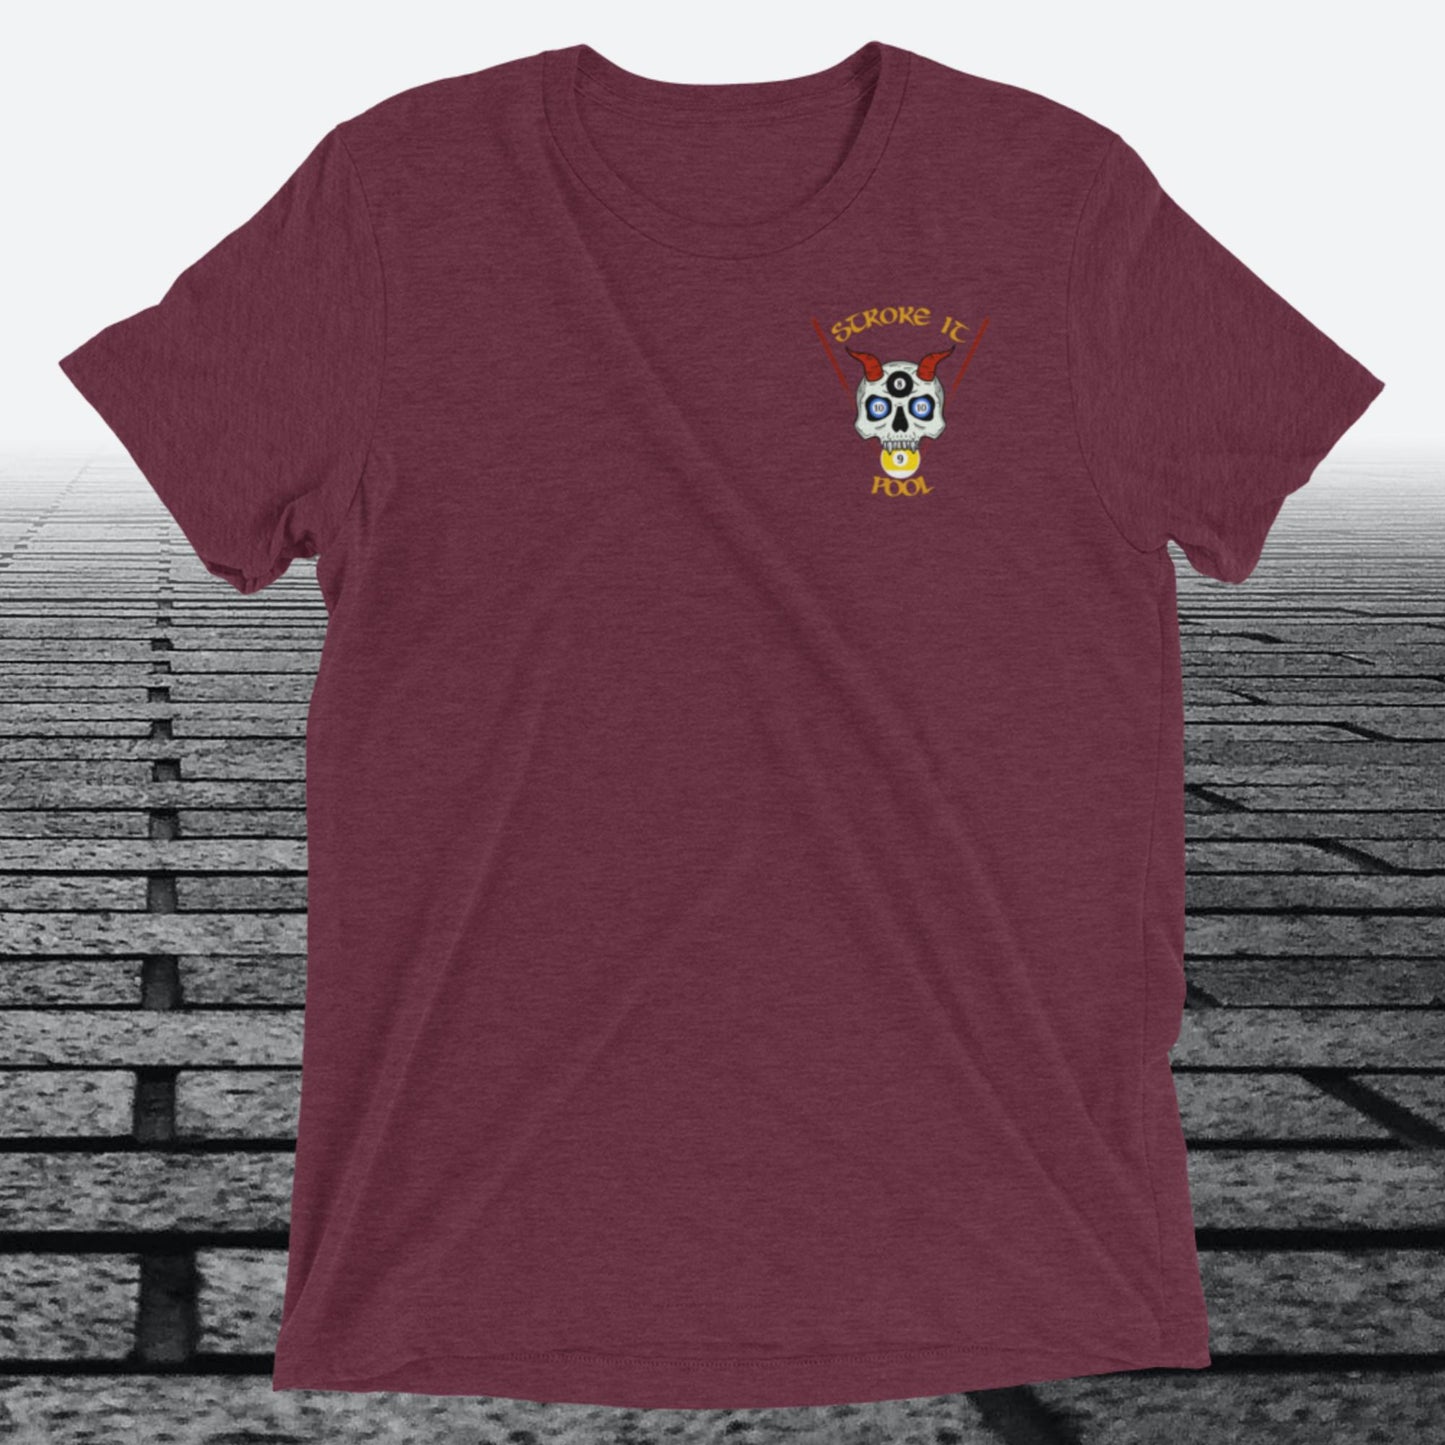 Felt Up with Logo on the front, Tri-blend t-shirt